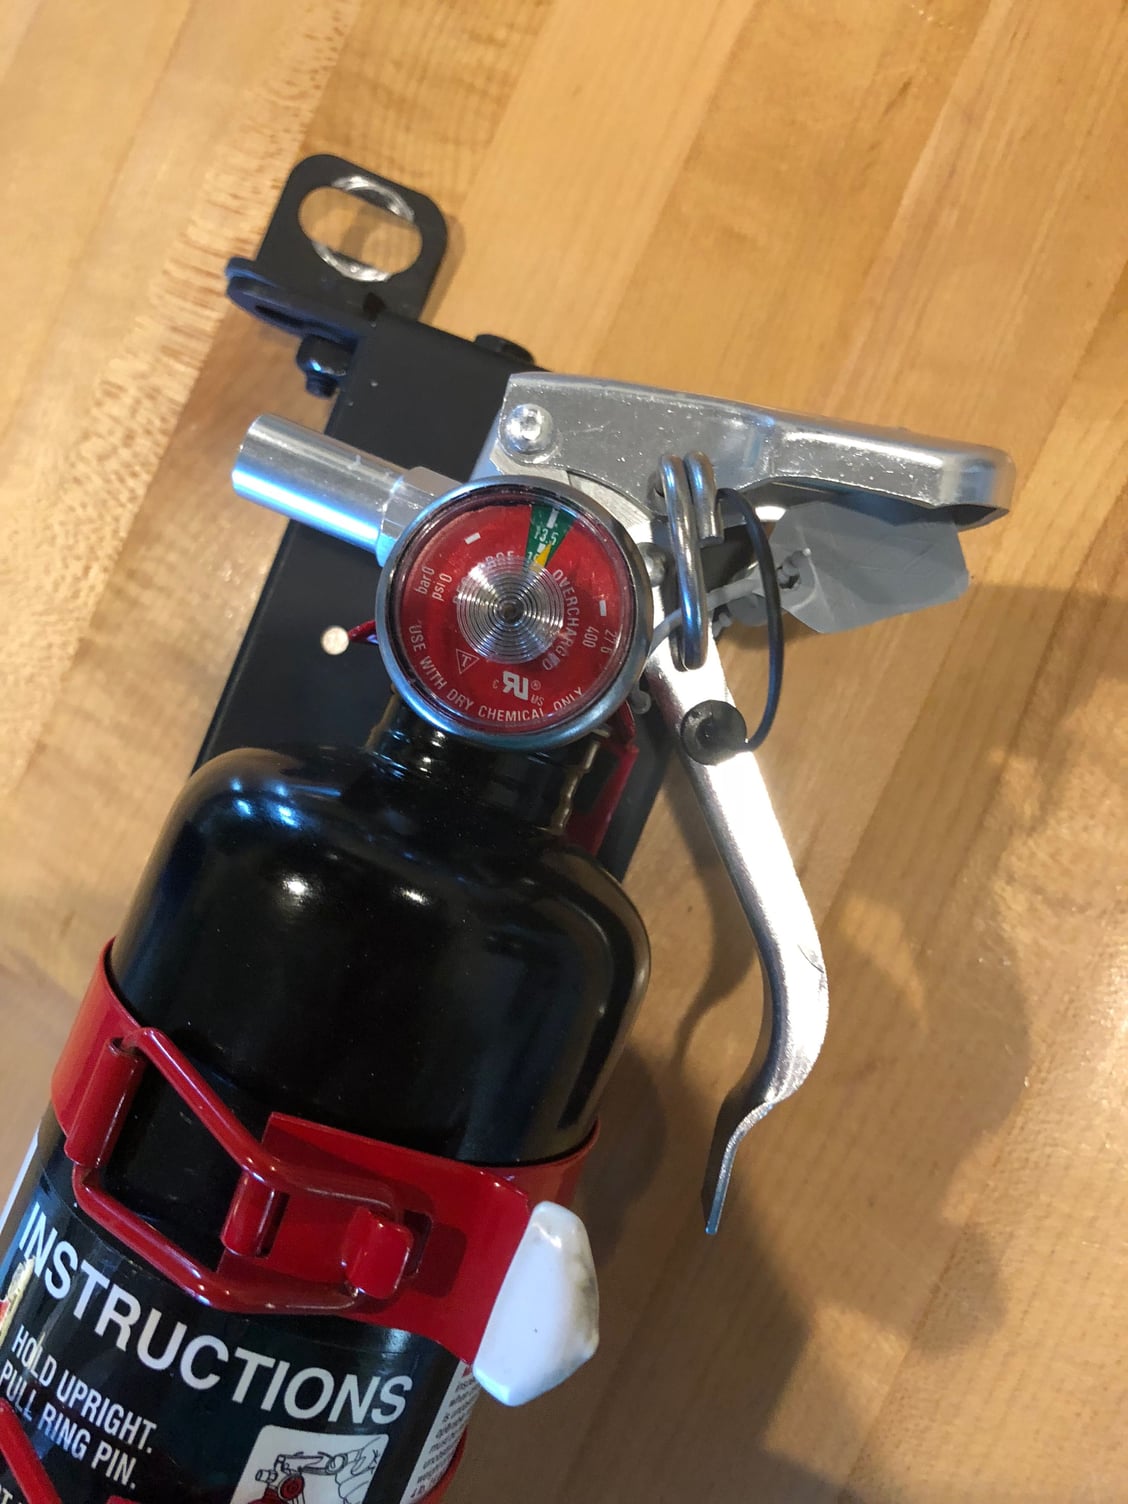 FS (For Sale) 2.5 LB Dry Chemical fire extinguisher with seat mount ...